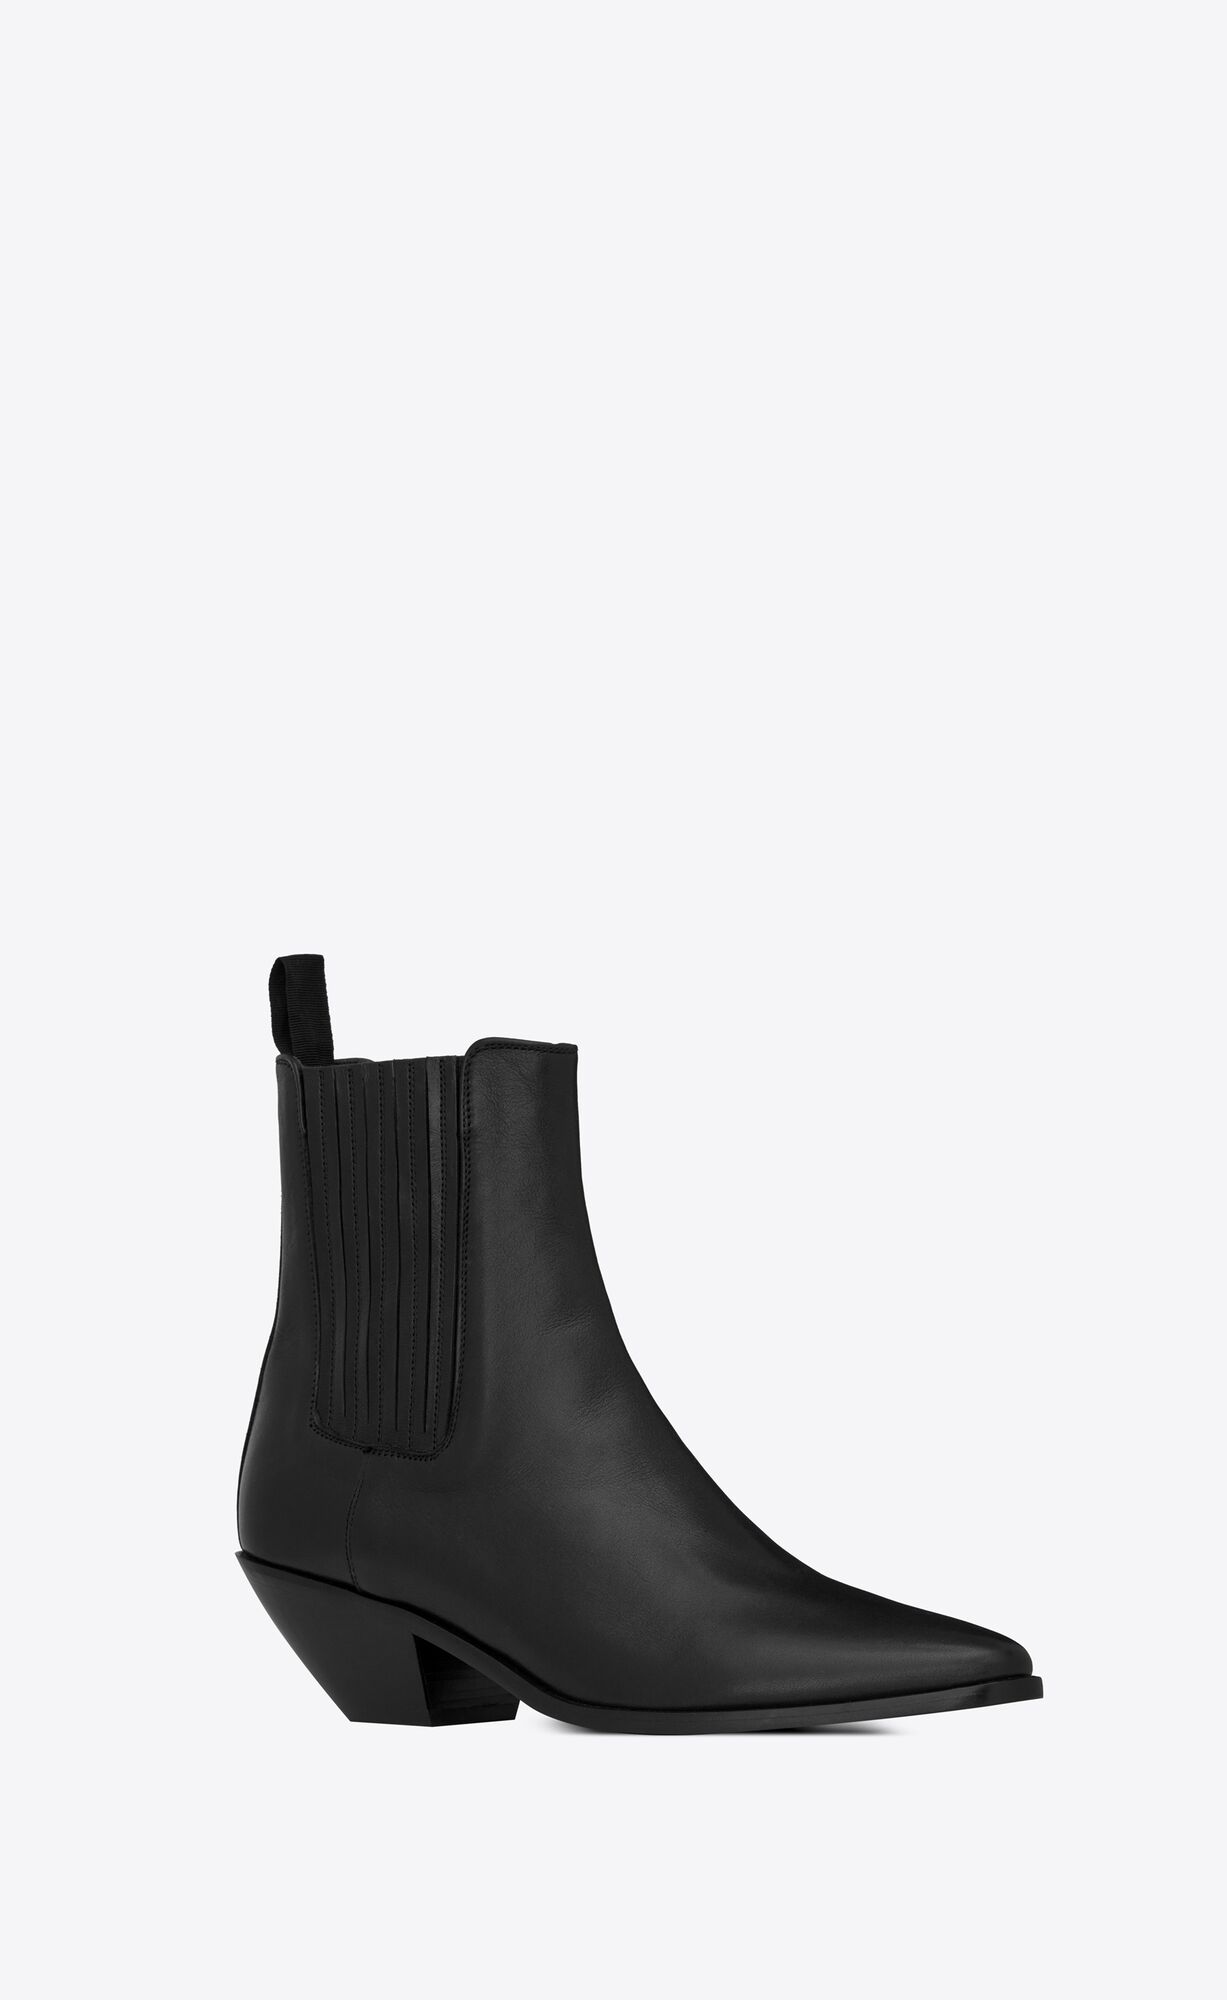 WEST Chelsea boots in smooth leather | Saint Laurent | YSL.com